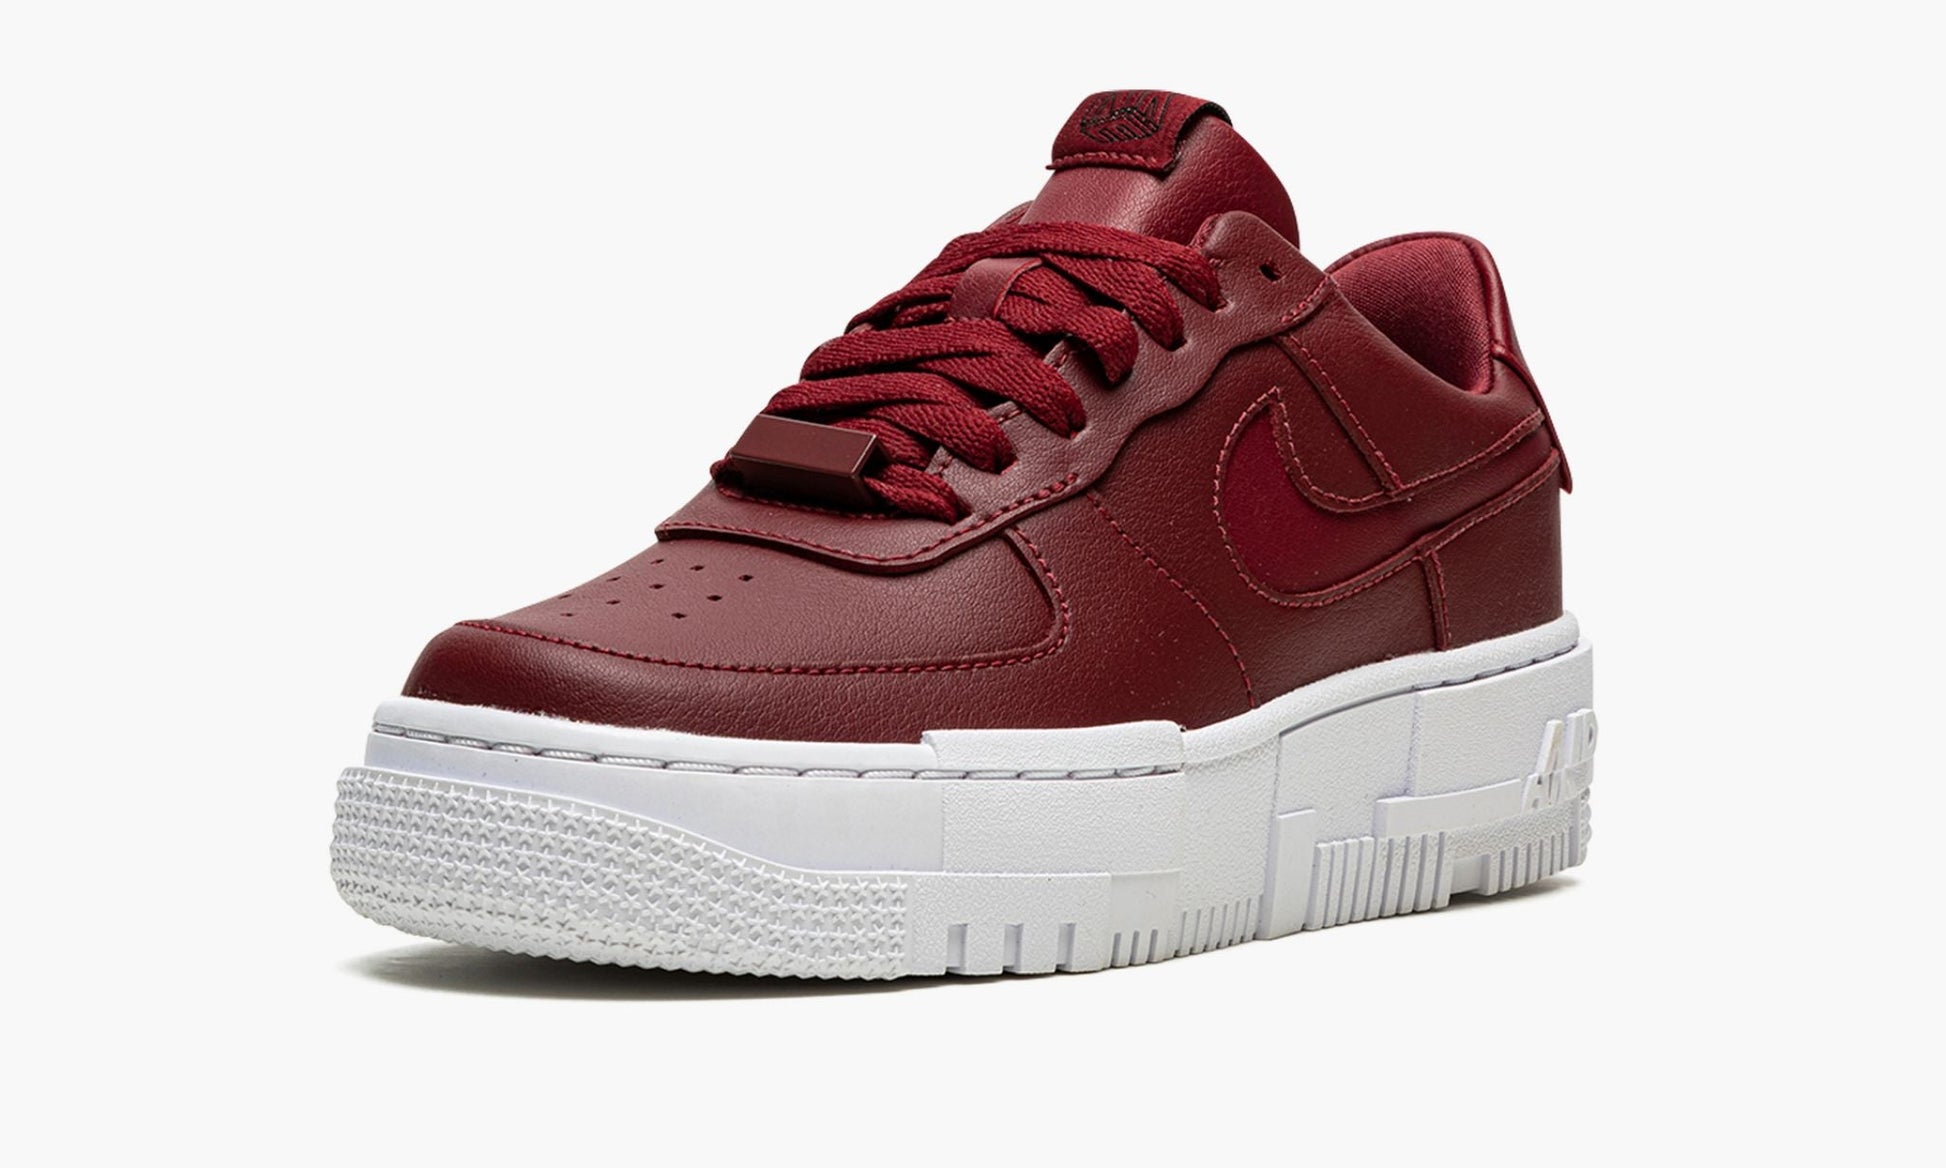 WMNS Air Force 1 Pixel "Team Red"